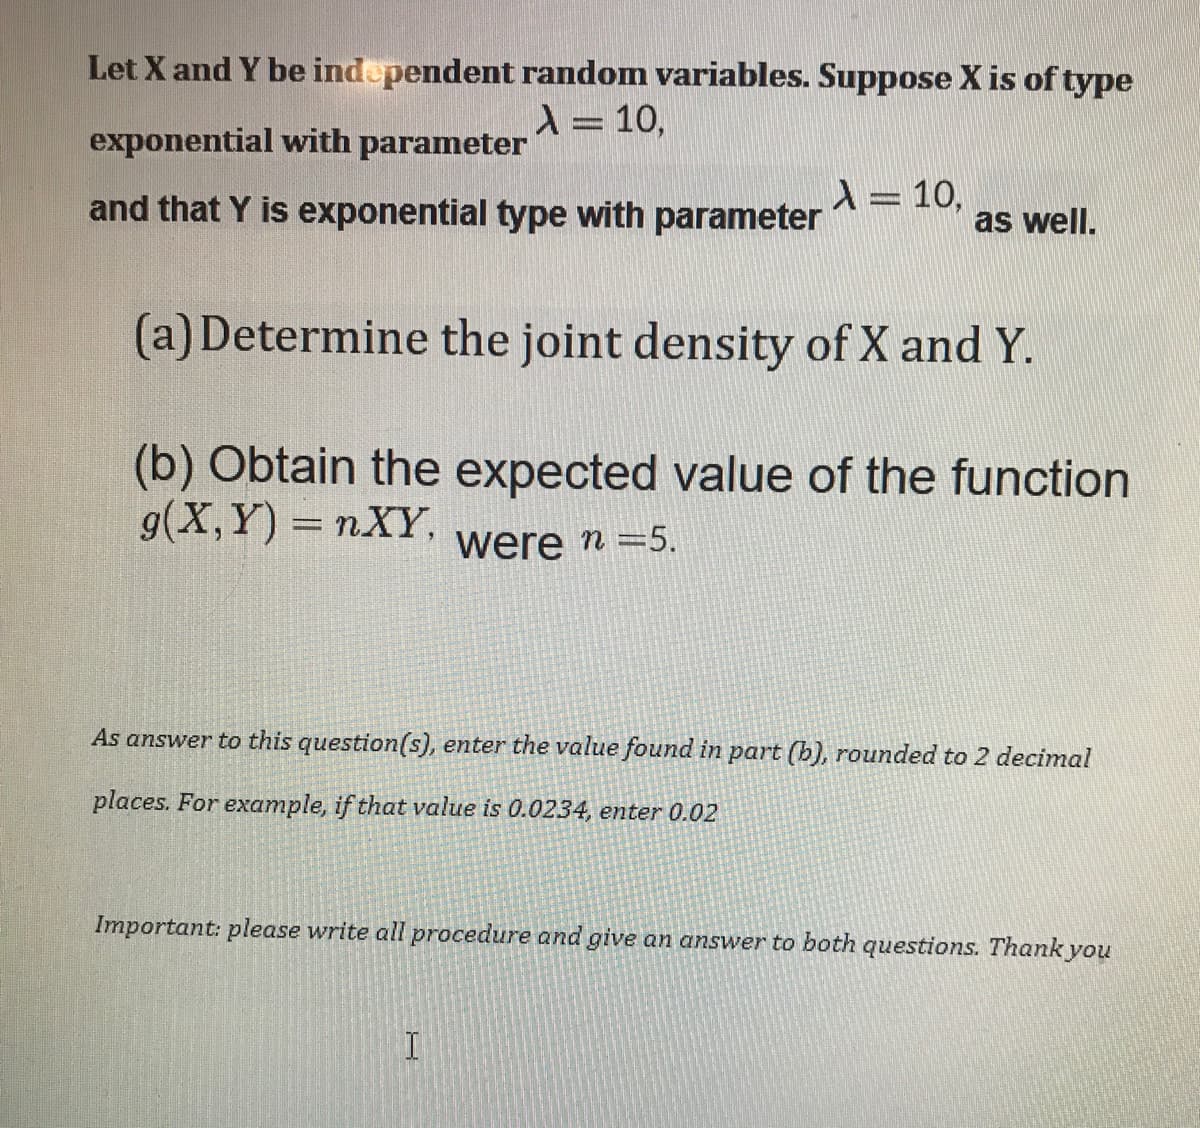 Let X and Y be independent random variables. Suppose X is of type
X= 10,
exponential with parameter
and that Y is exponential type with parameter
\= 10,
as well.
(a) Determine the joint density of X and Y.
(b) Obtain the expected value of the function
g(X, Y) = nXY,
were n =5.
As answer to this question(s), enter the value found in part (b), rounded to 2 decimal
places. For example, if that value is 0.0234, enter 0.02
Important: please write all procedure and give an answer to both questions. Thank you
I
